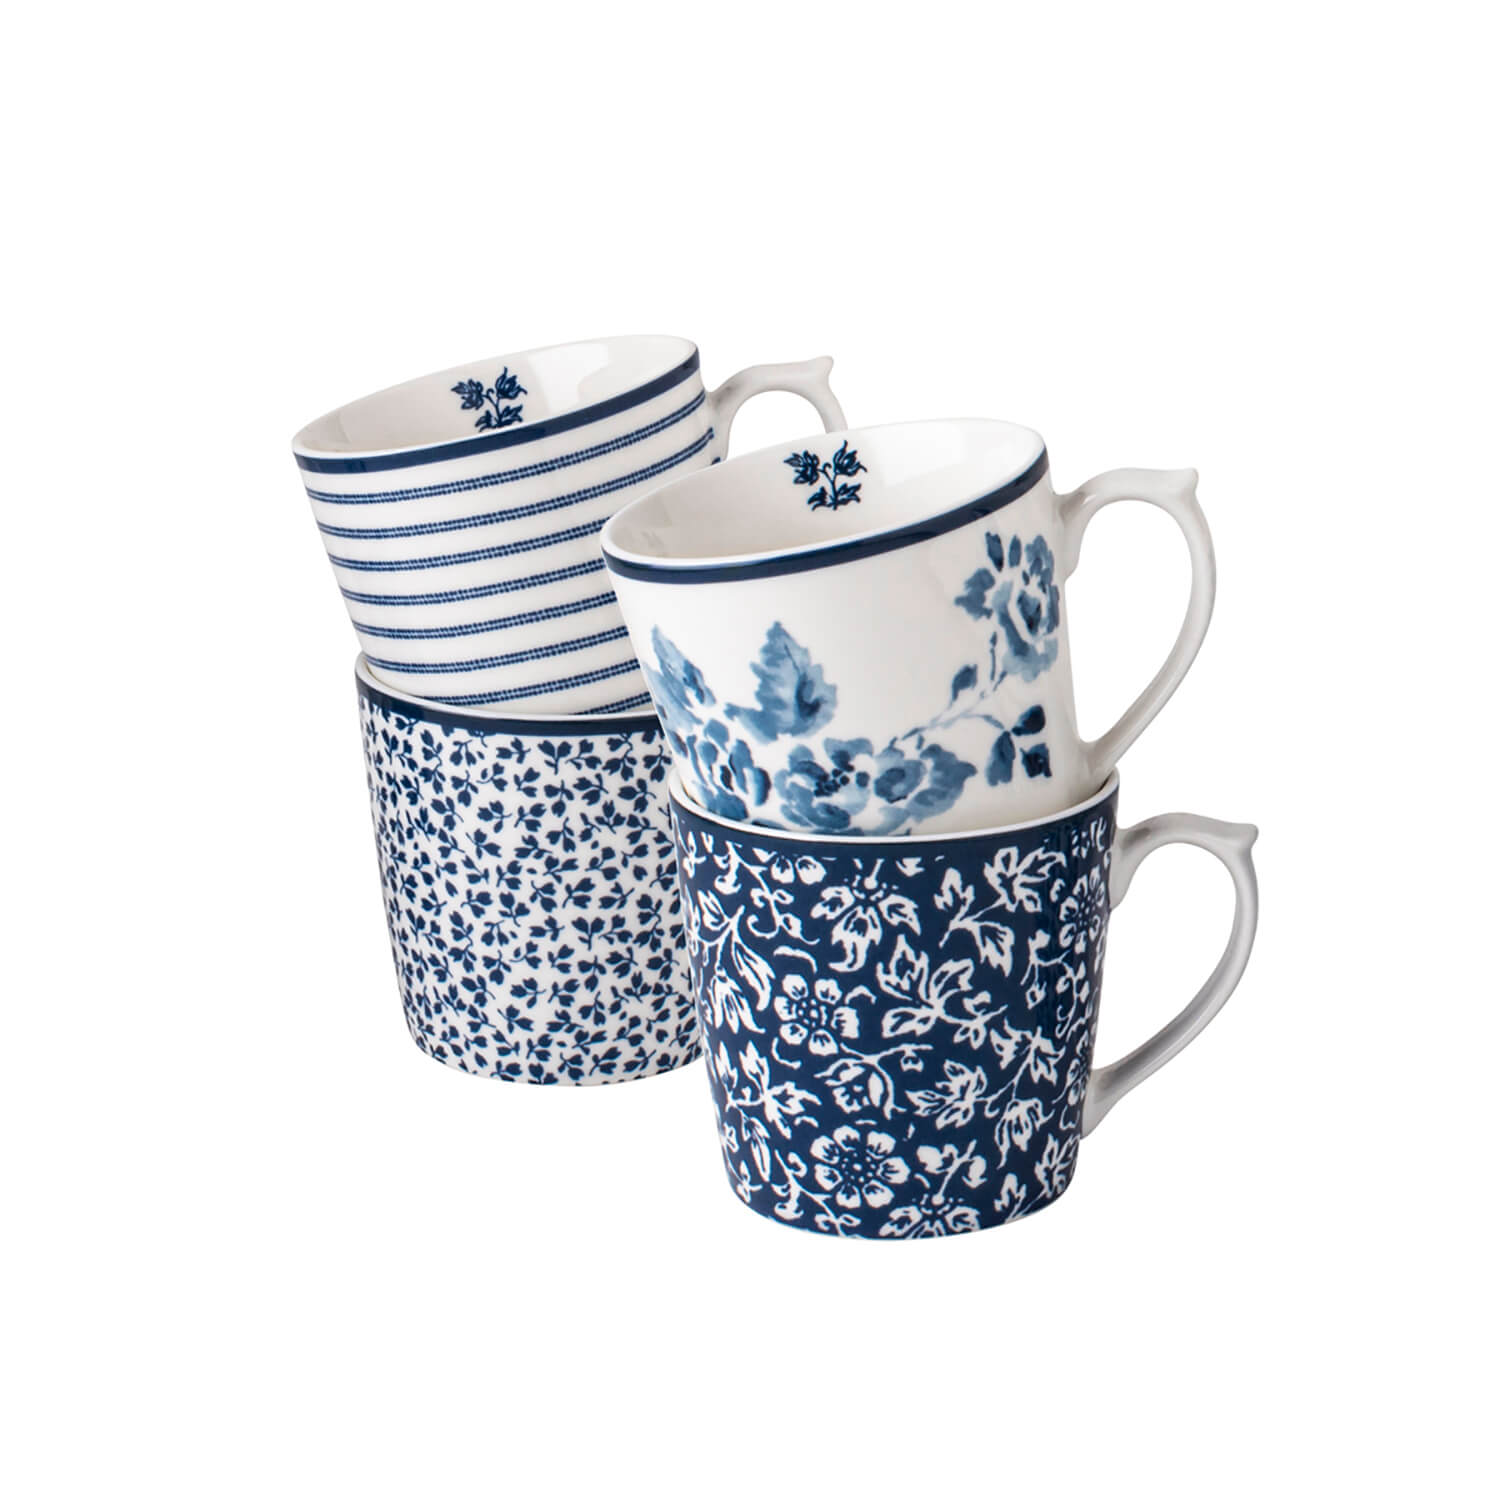 Laura Ashley Blueprint Collectables Set of 4 Mugs - 30cl - Multi 2 Shaws Department Stores